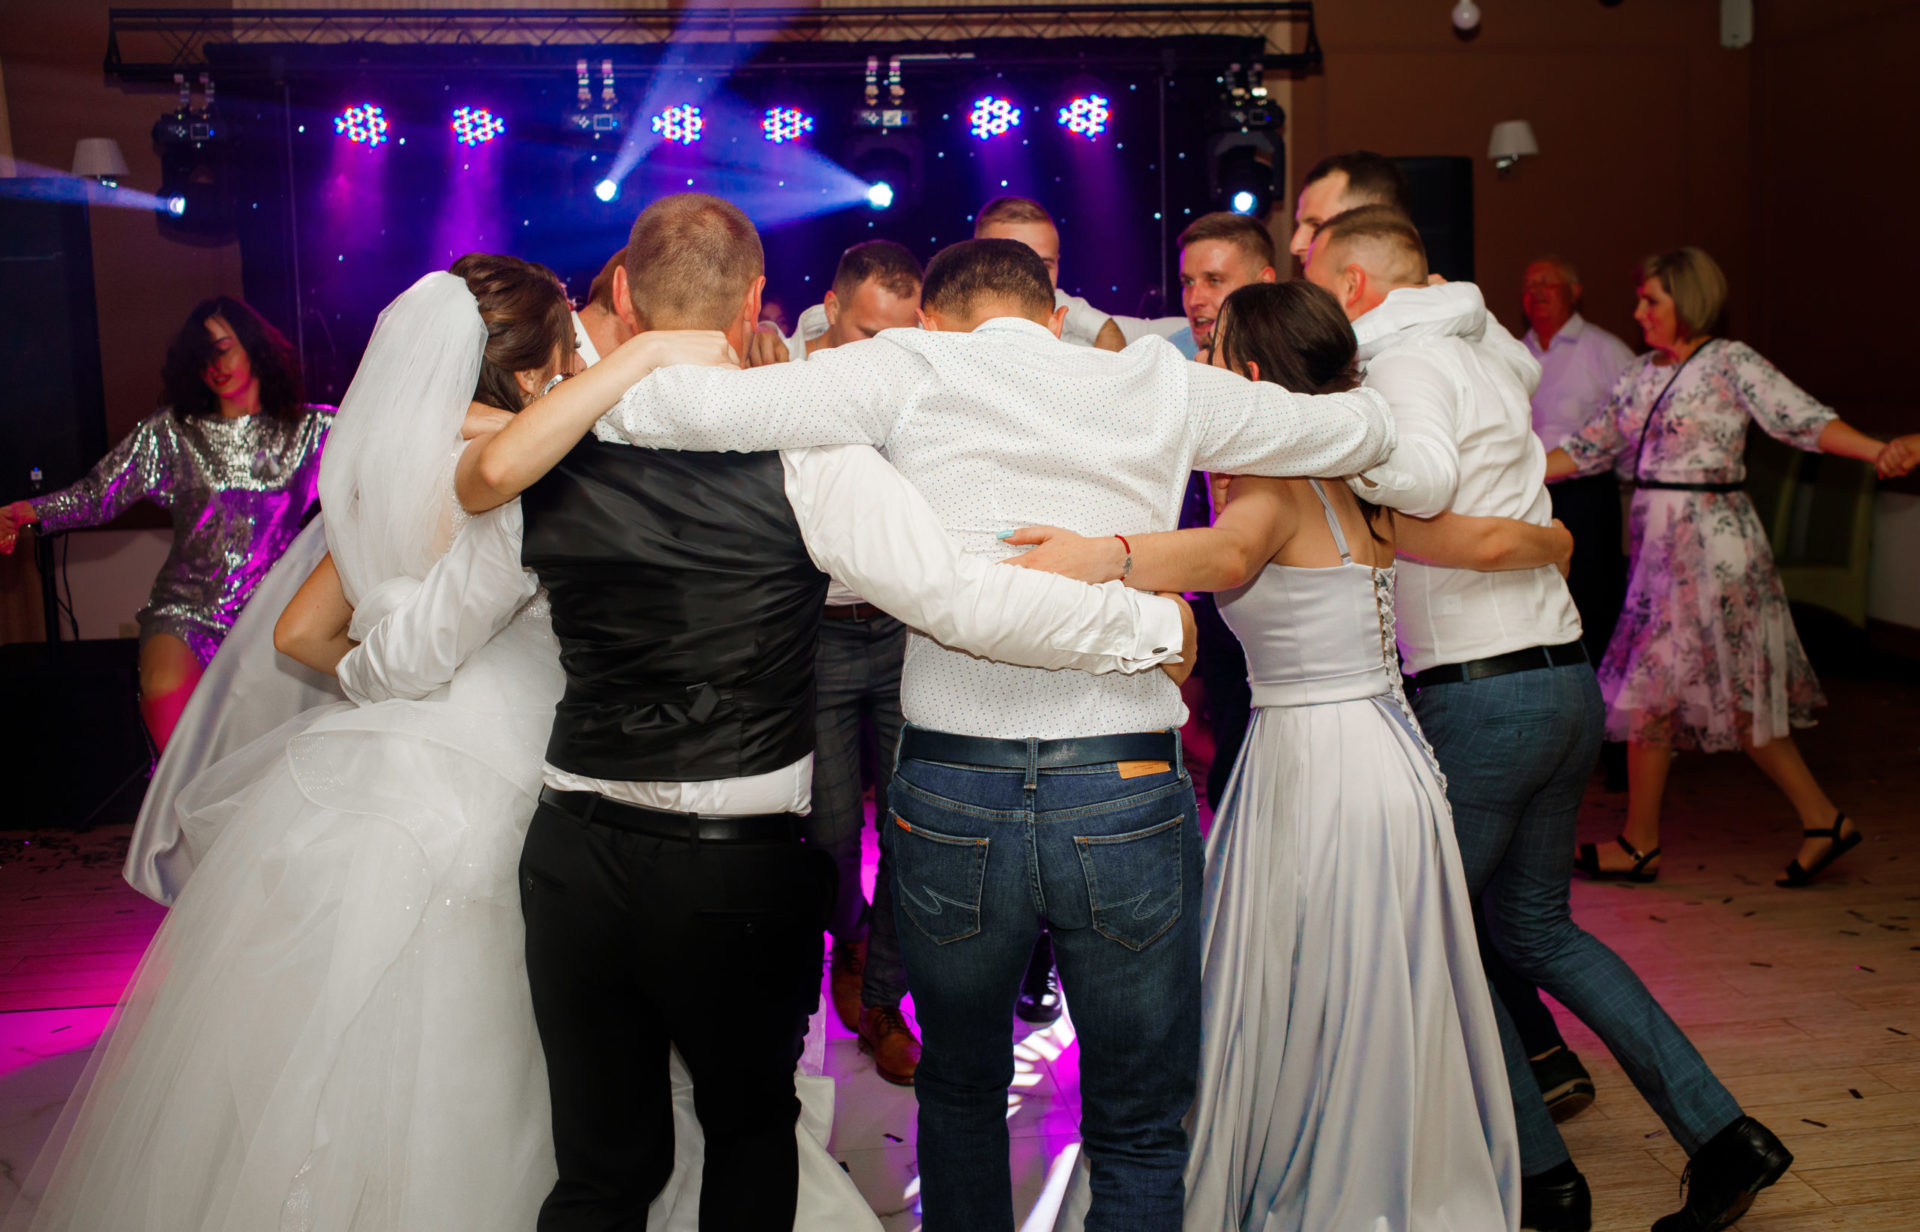 A group of guests dancing holding each other's shoulders.